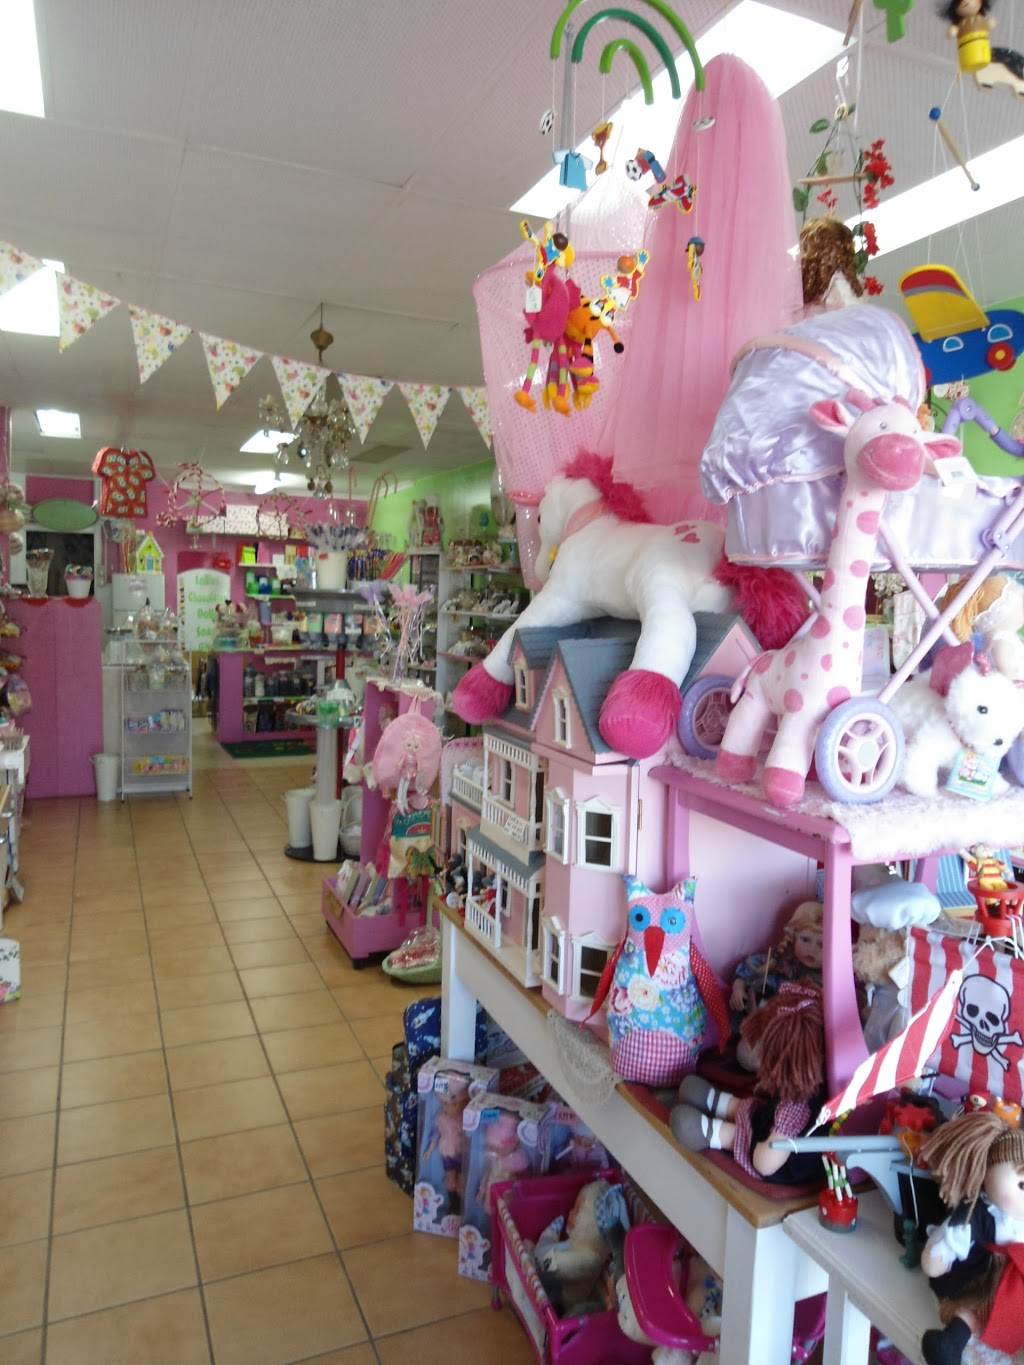 Kaboozies Lollies & Gifts | store | 1 Normanby St, Yeppoon QLD 4703, Australia | 0749394480 OR +61 7 4939 4480